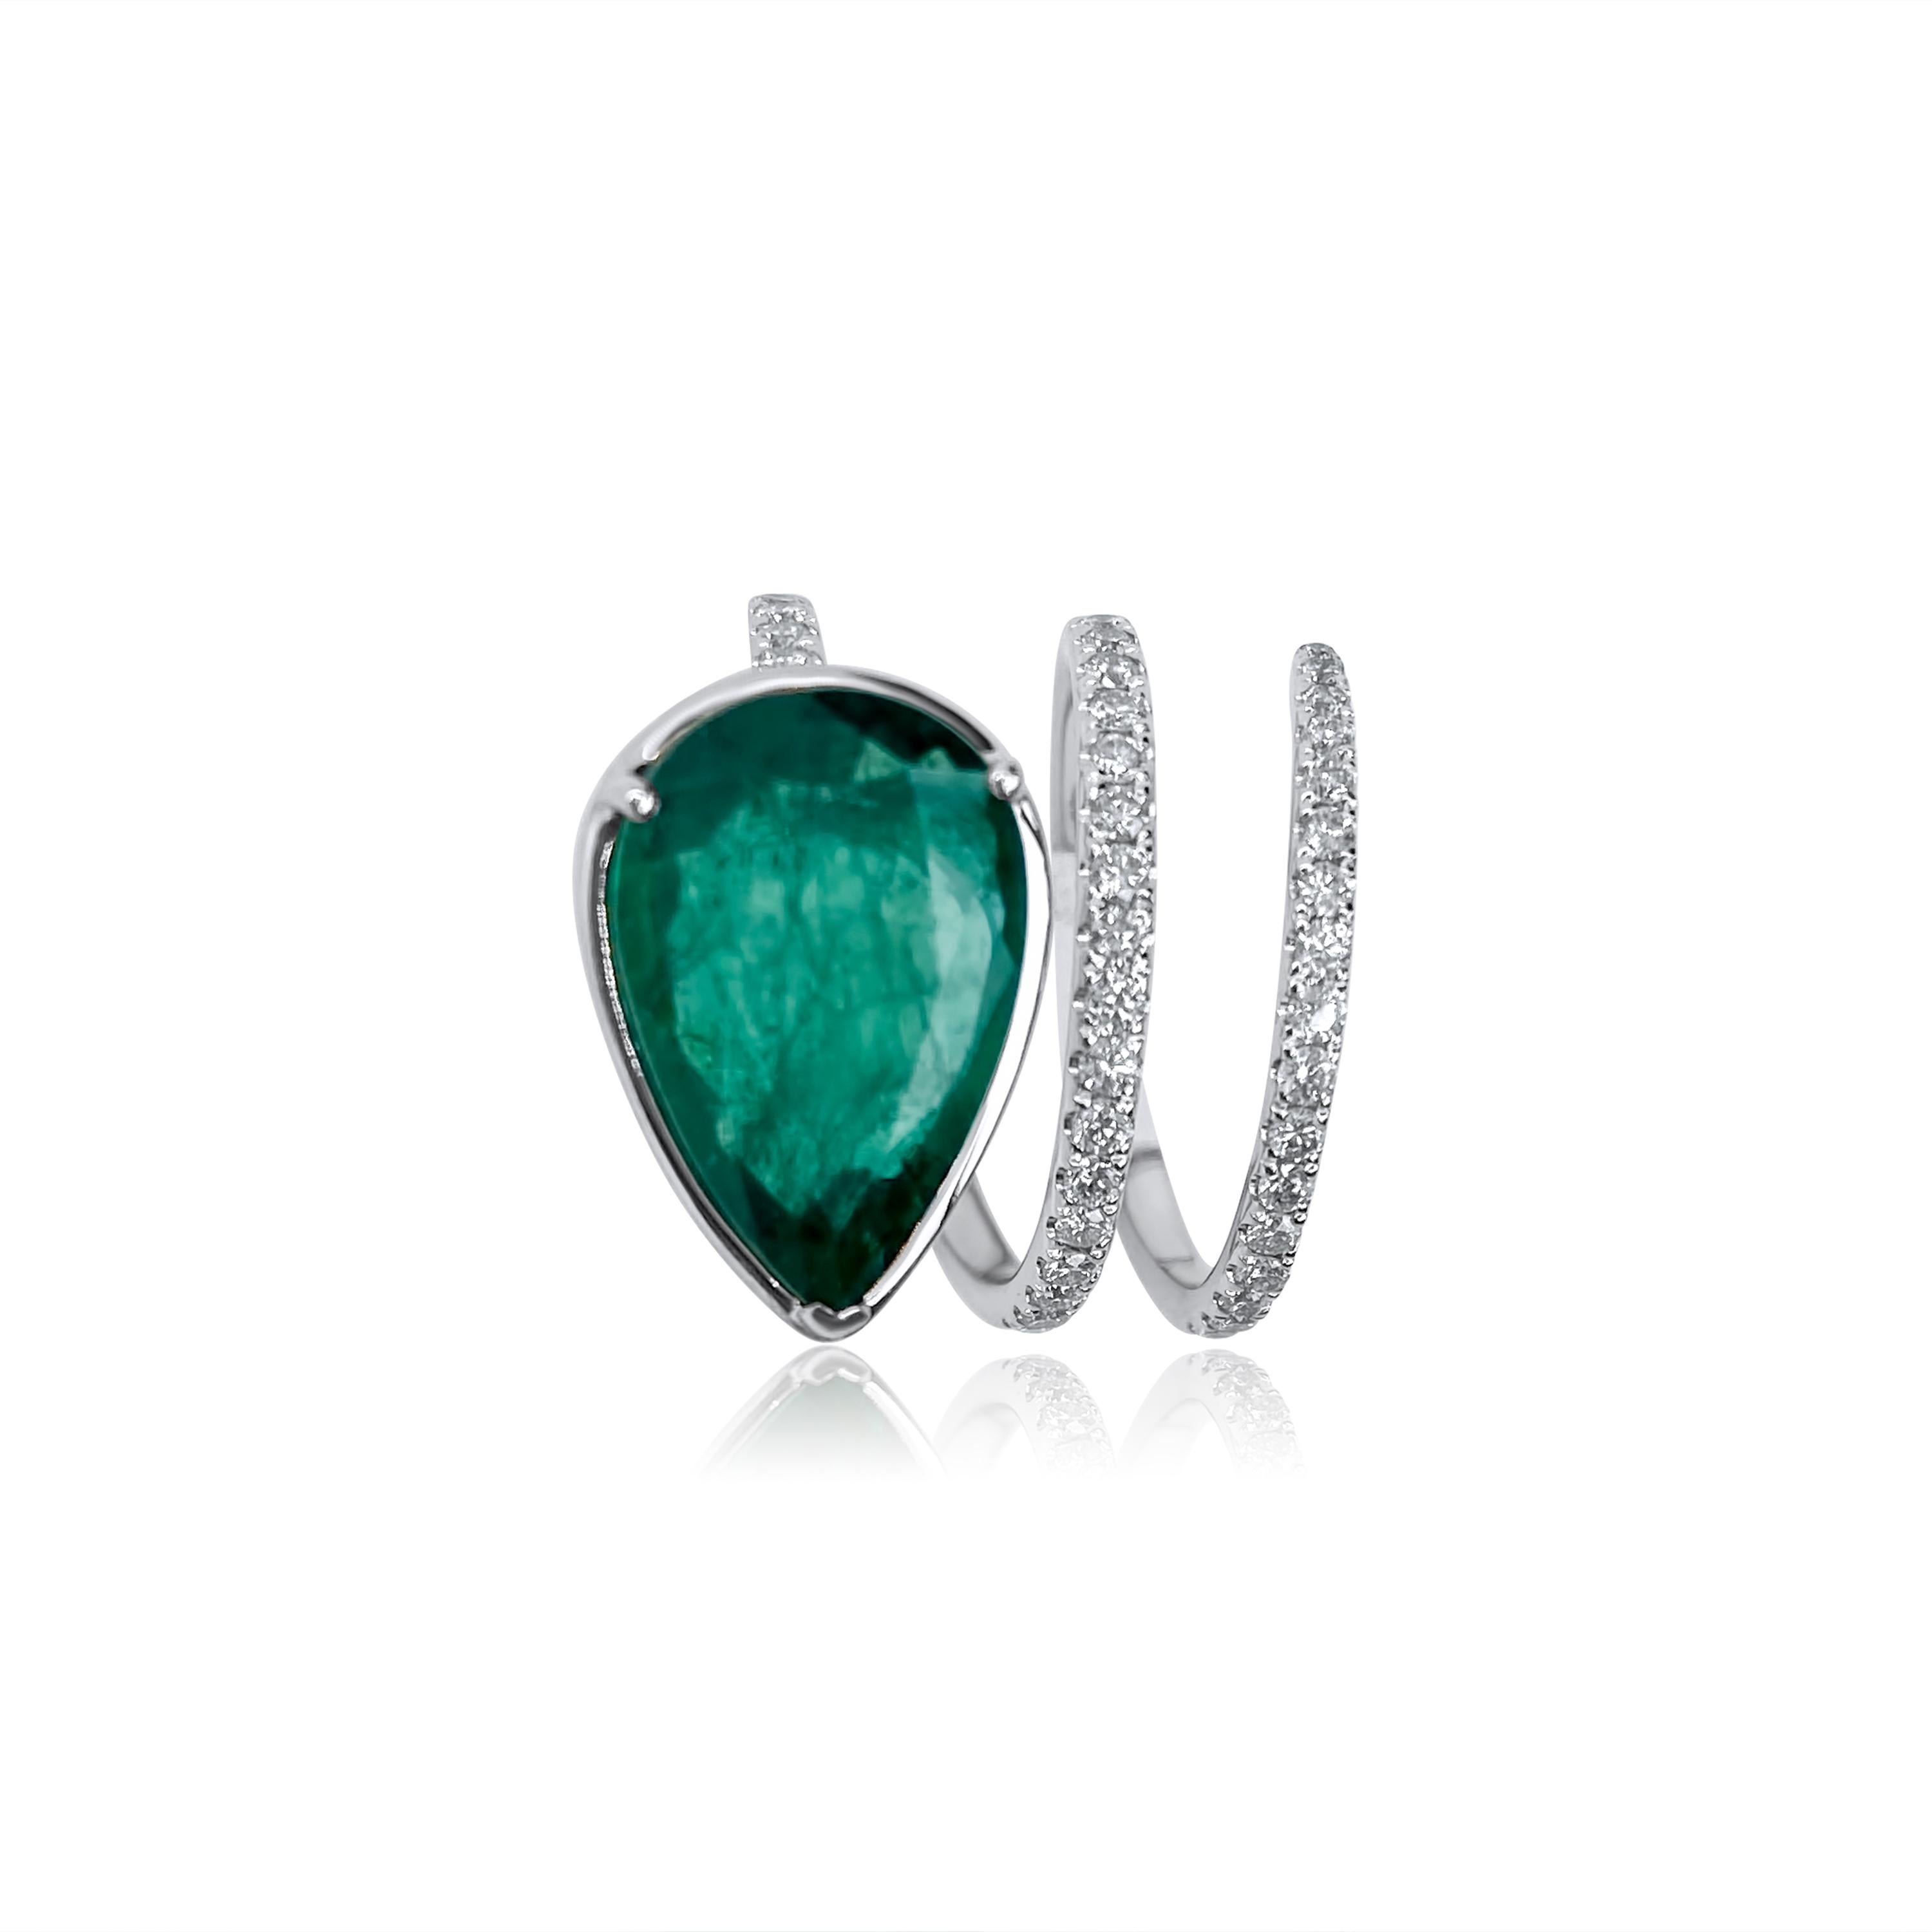 Make a statement with this significant pear shaped emerald